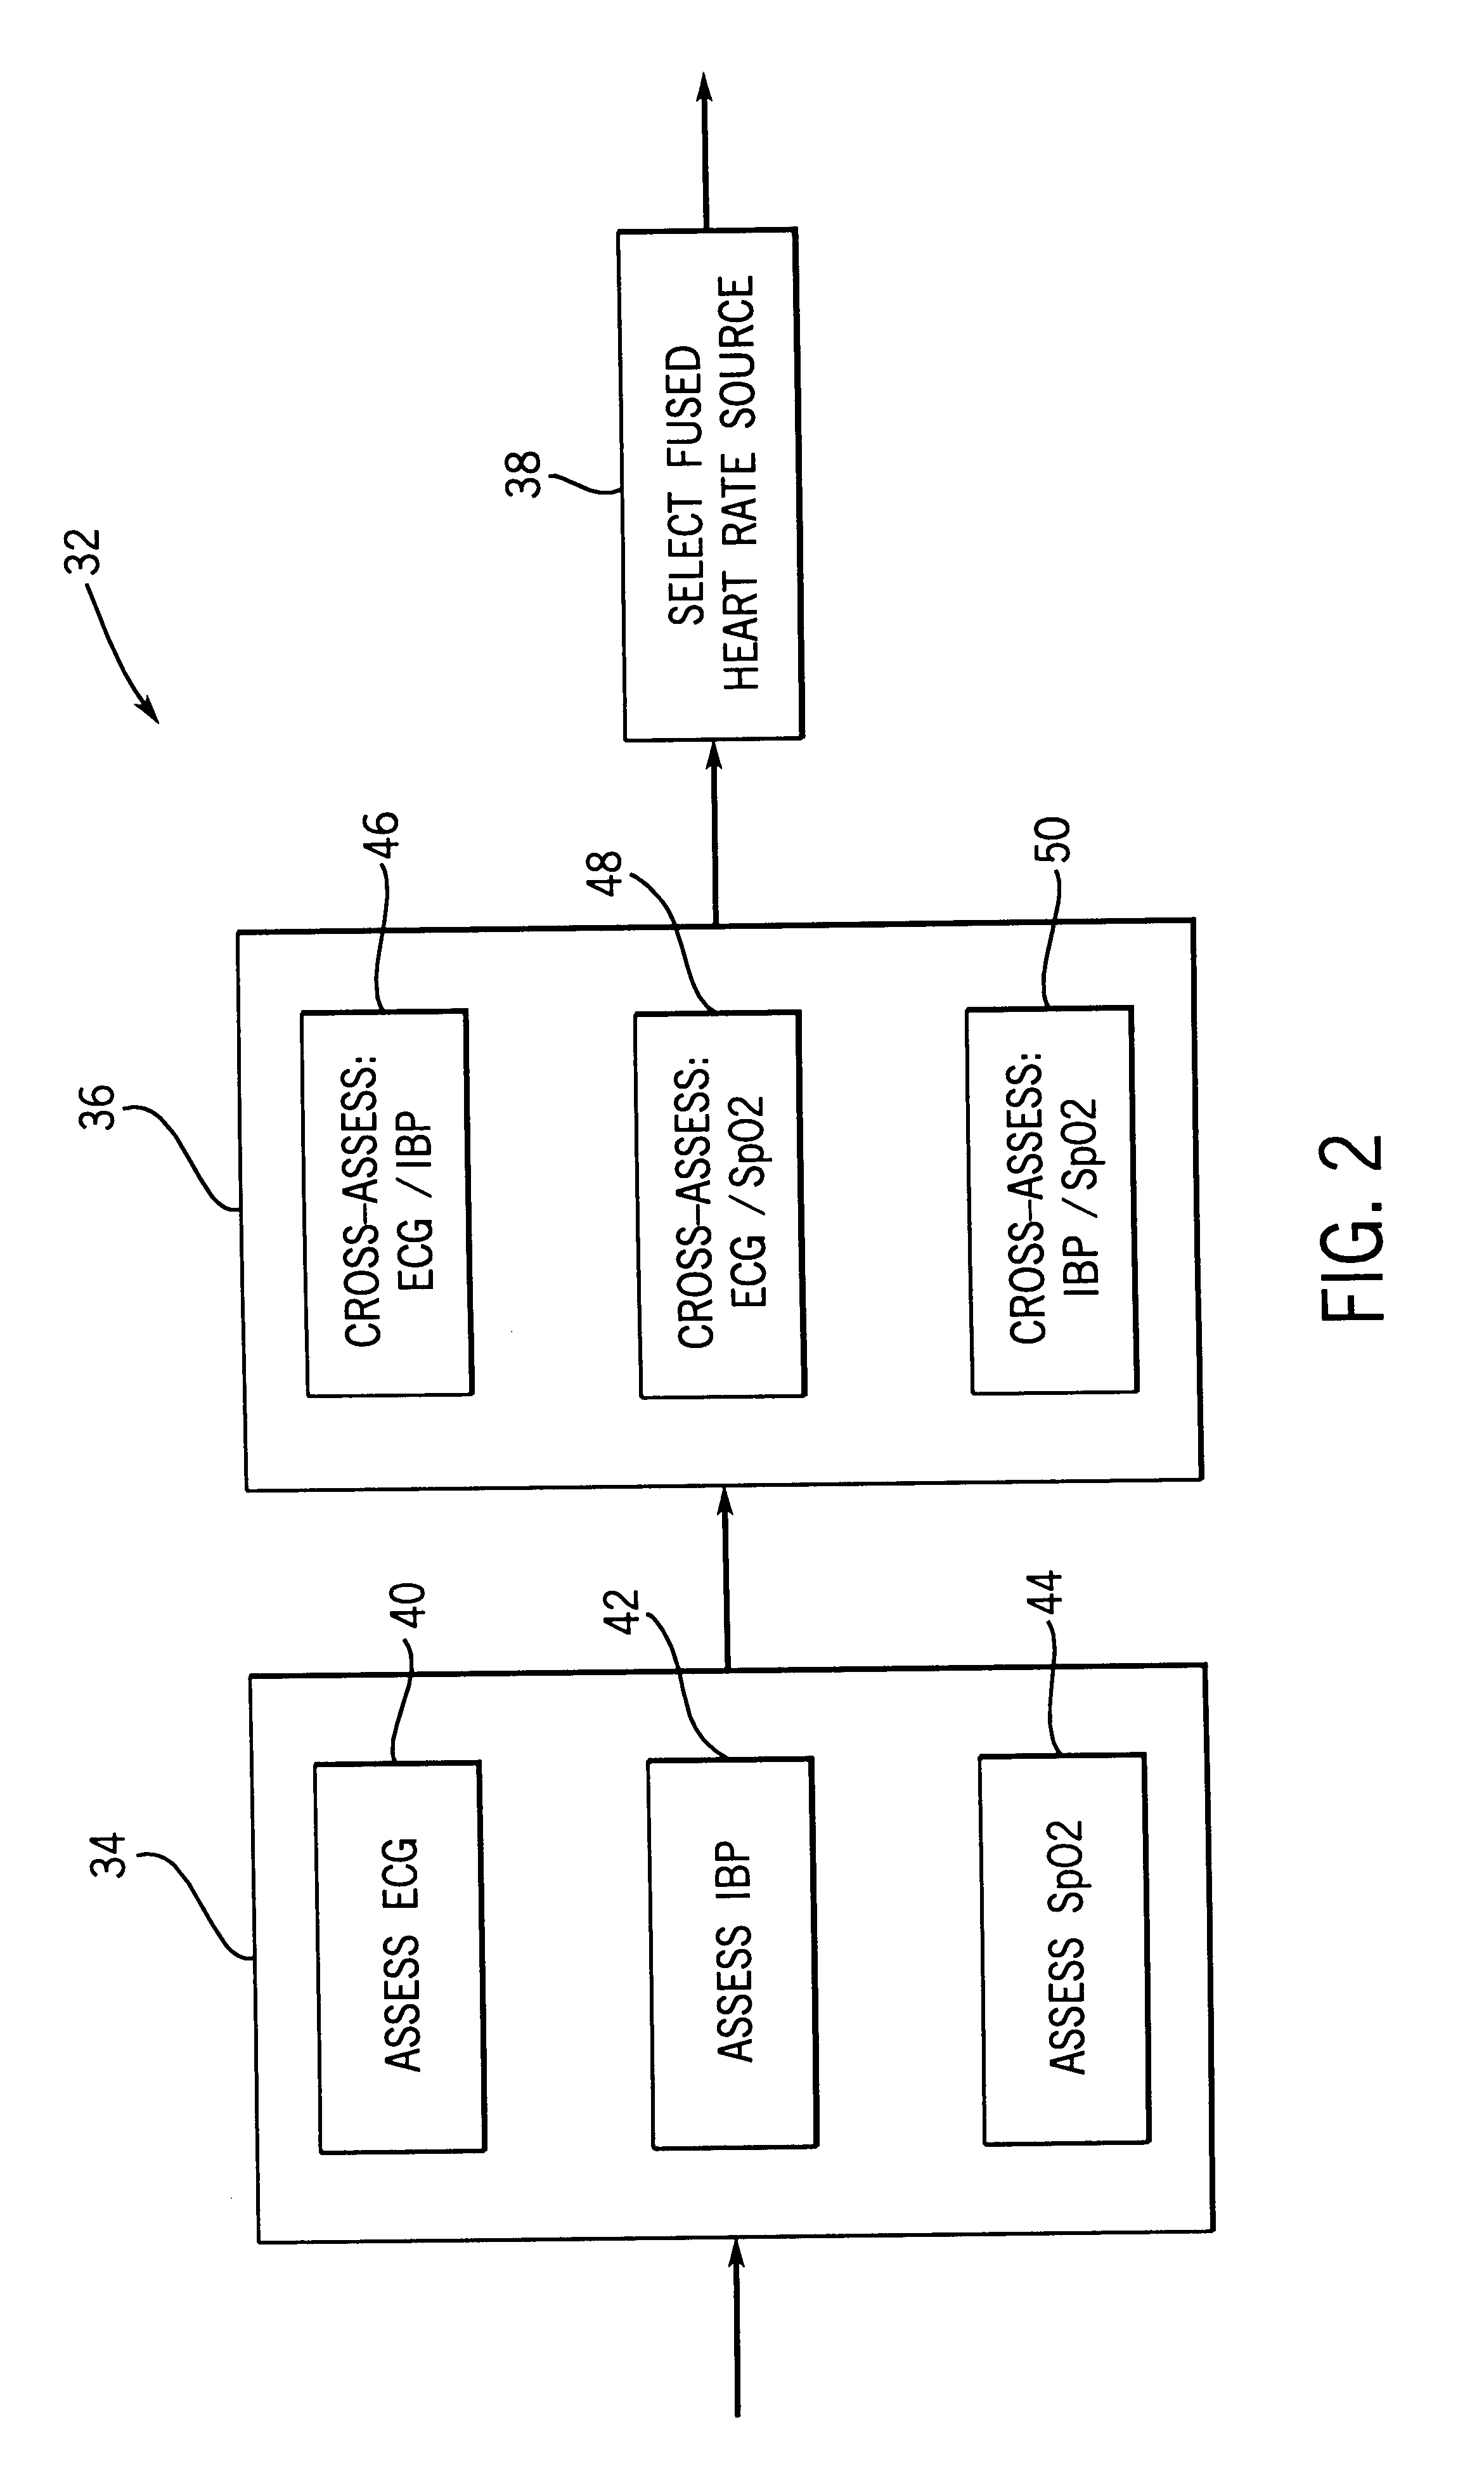 System and method for selecting physiological data from a plurality of physiological data sources